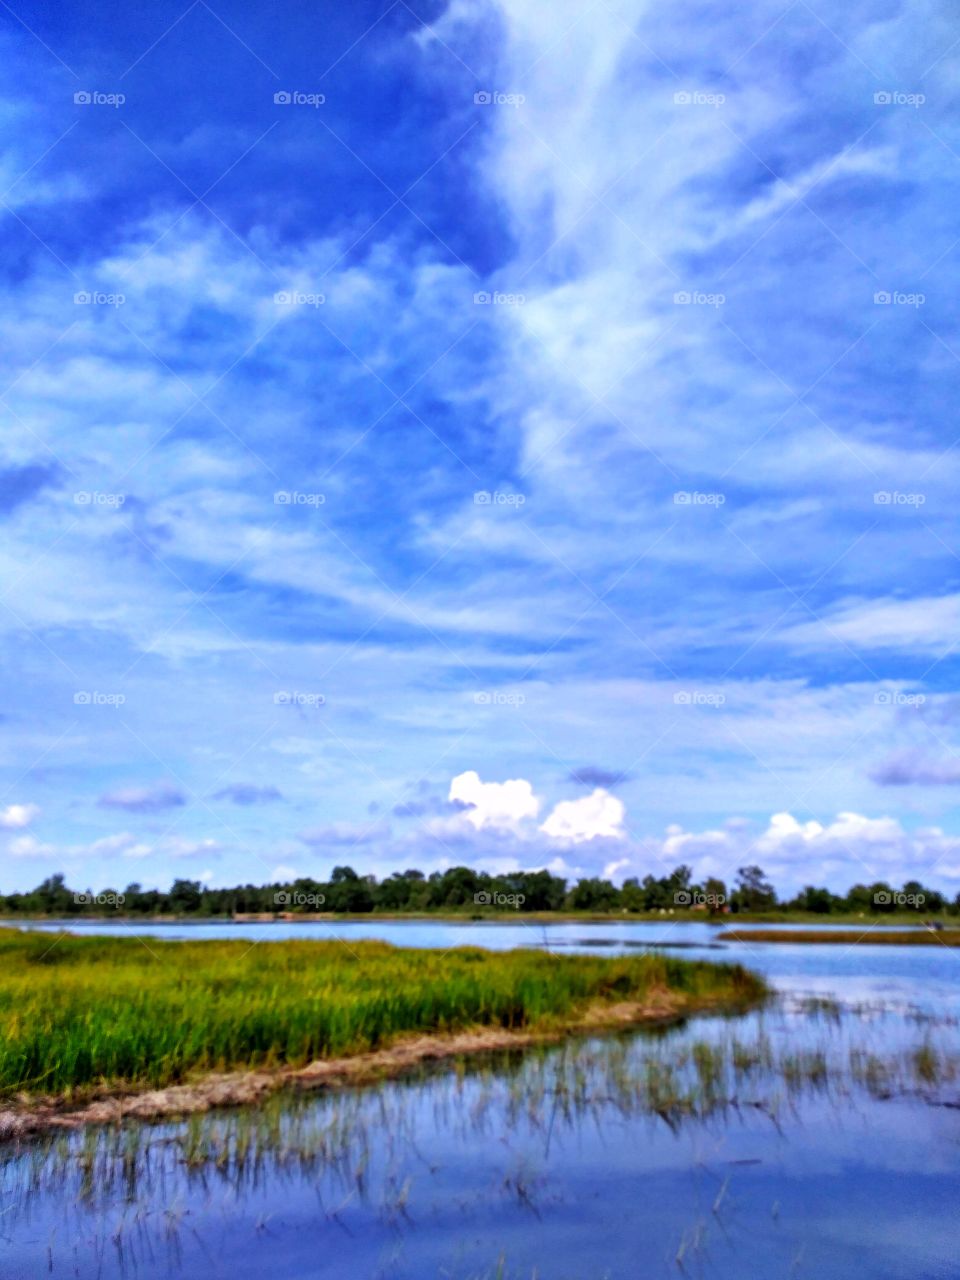 green swamp under the blue sky